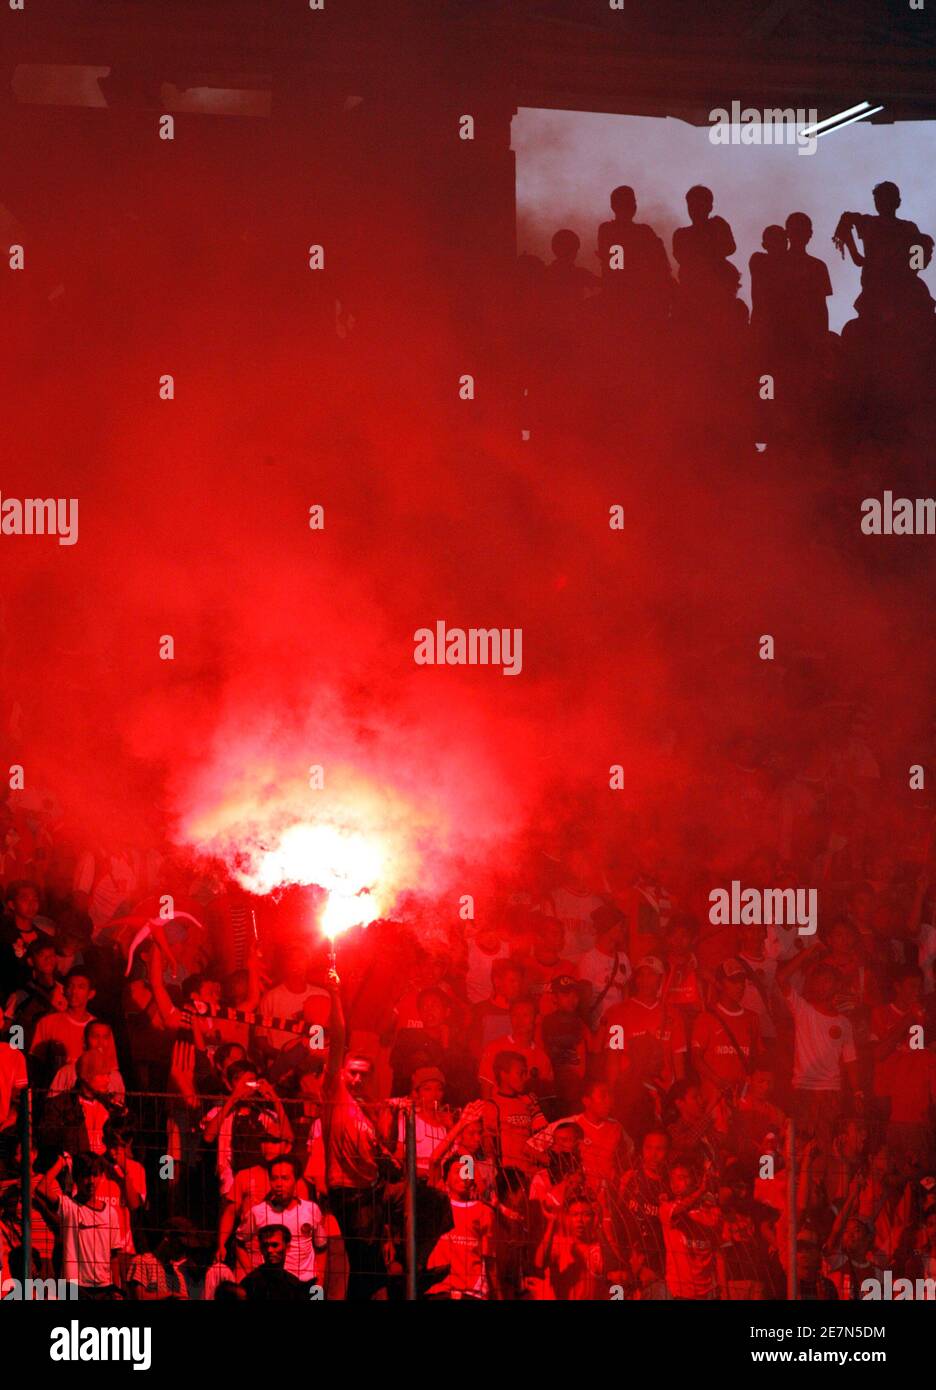 Indonesia supporters celebrate after a goal by Indonesia during the 2007 AFC Asian Cup Group D soccer match against Bahrain in Jakarta July 10, 2007. REUTERS/Beawiharta (INDONESIA) Stock Photo